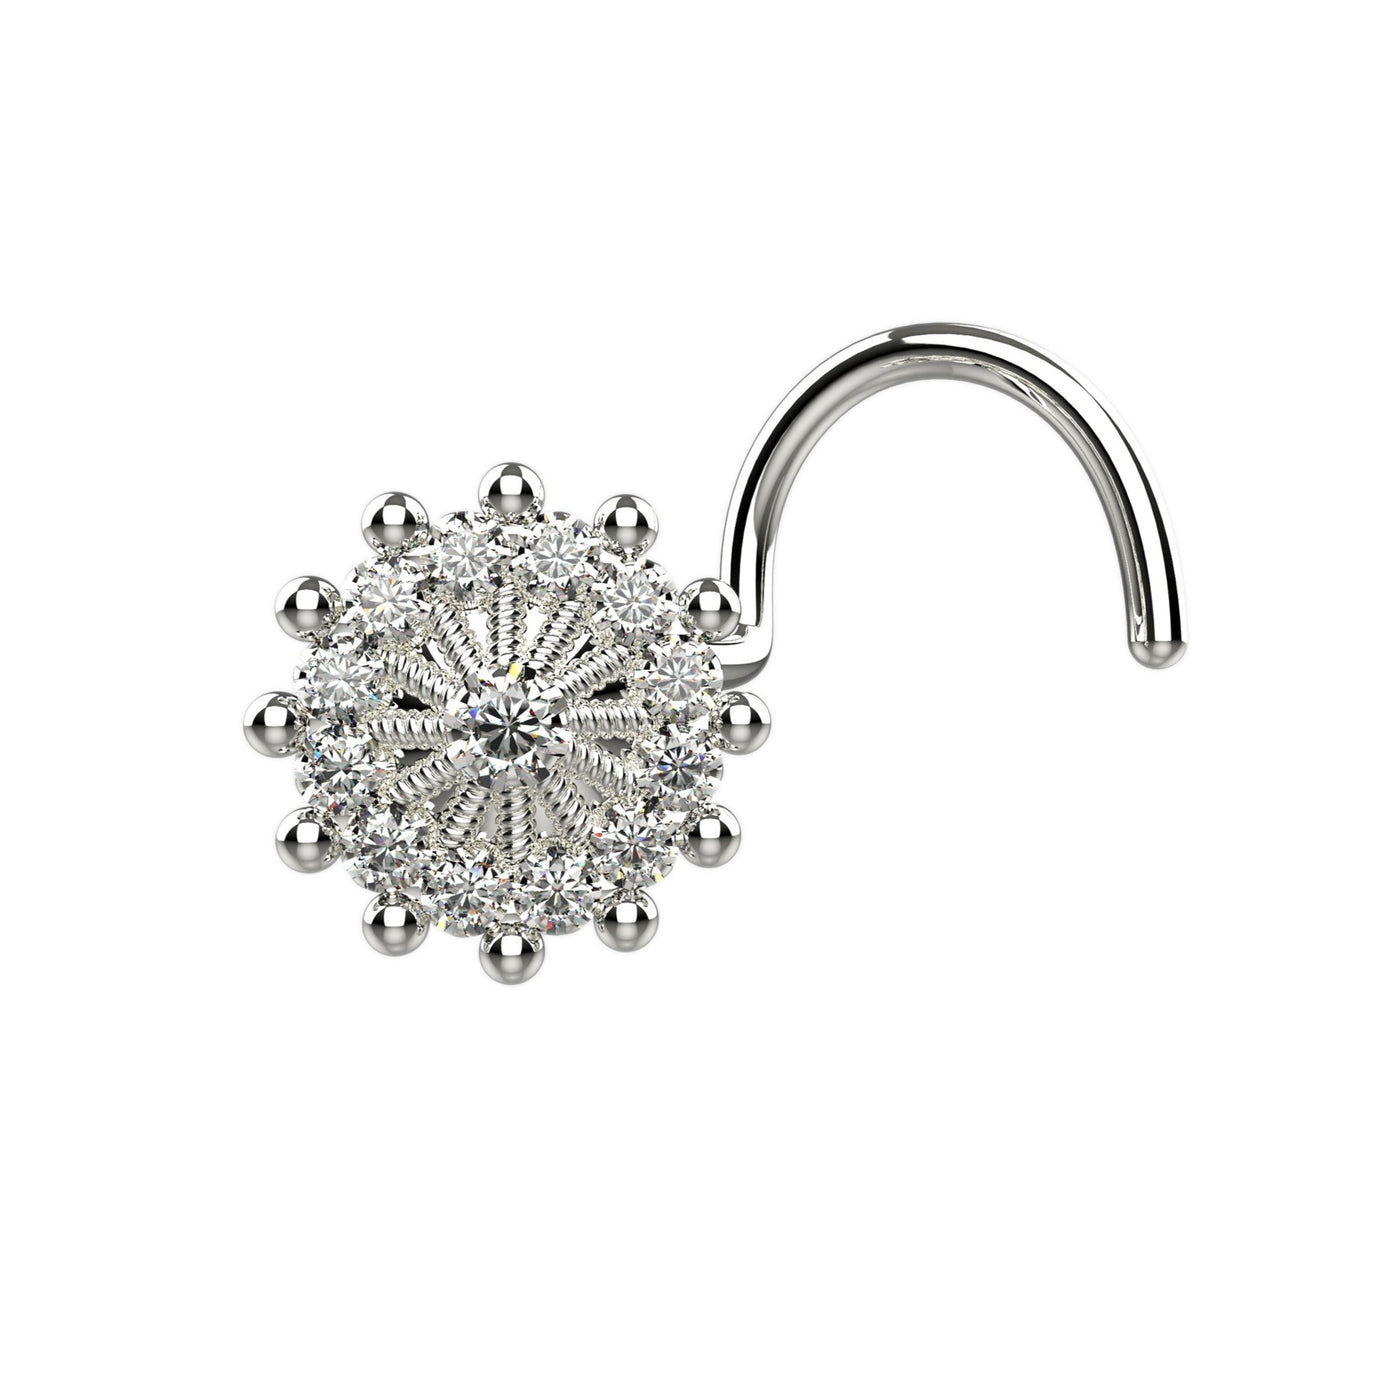 Silver nose studs for piercings